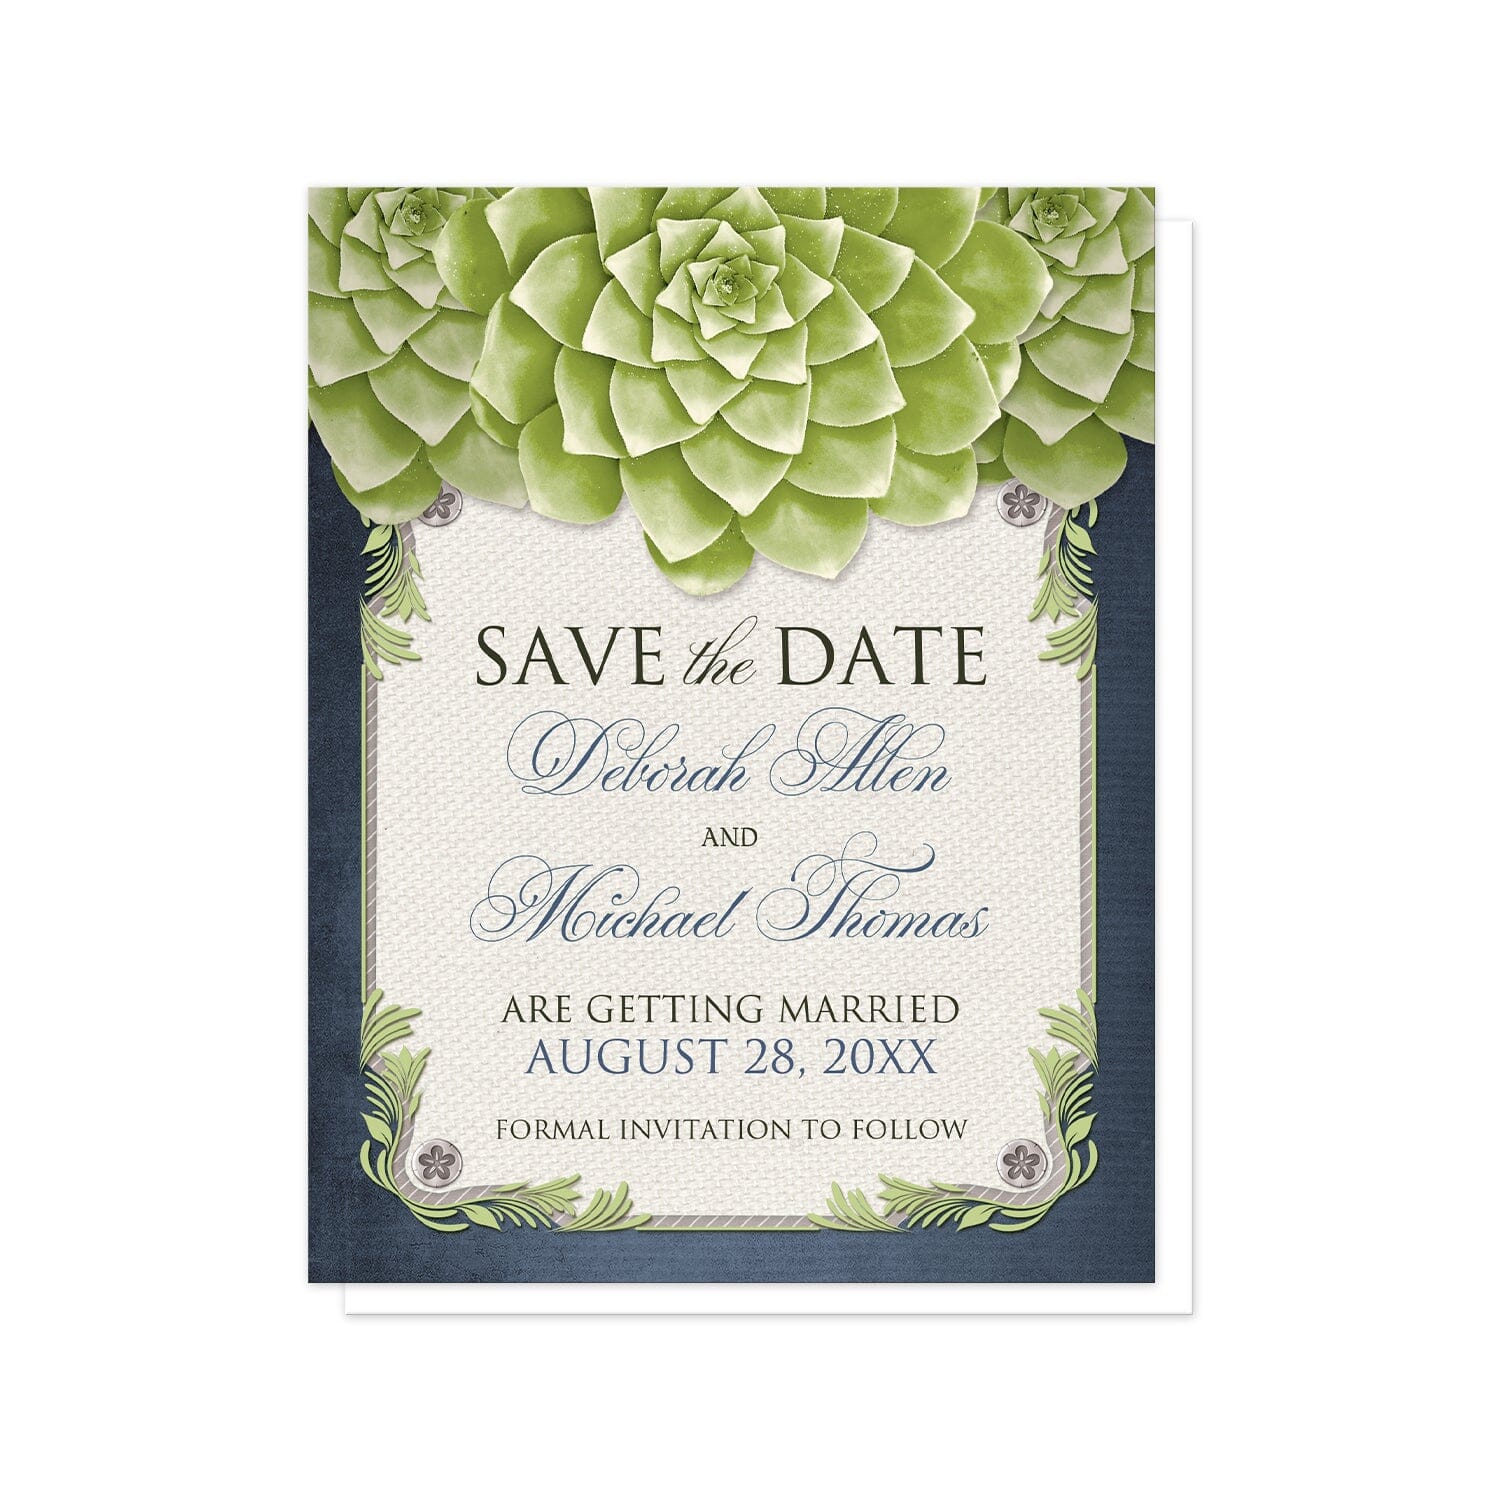 Rustic Succulent Garden Navy Save the Date Cards at Artistically Invited. Designed with three large and lovely green succulents along the top over a beige canvas texture illustration framed with a leafy green decorative border, striped gray, and four floral metal pin illustrations, all over a navy blue background along the edges. Your personalized wedding date details are custom printed in dark gray and navy blue over the beige canvas background in the center area below the succulents.